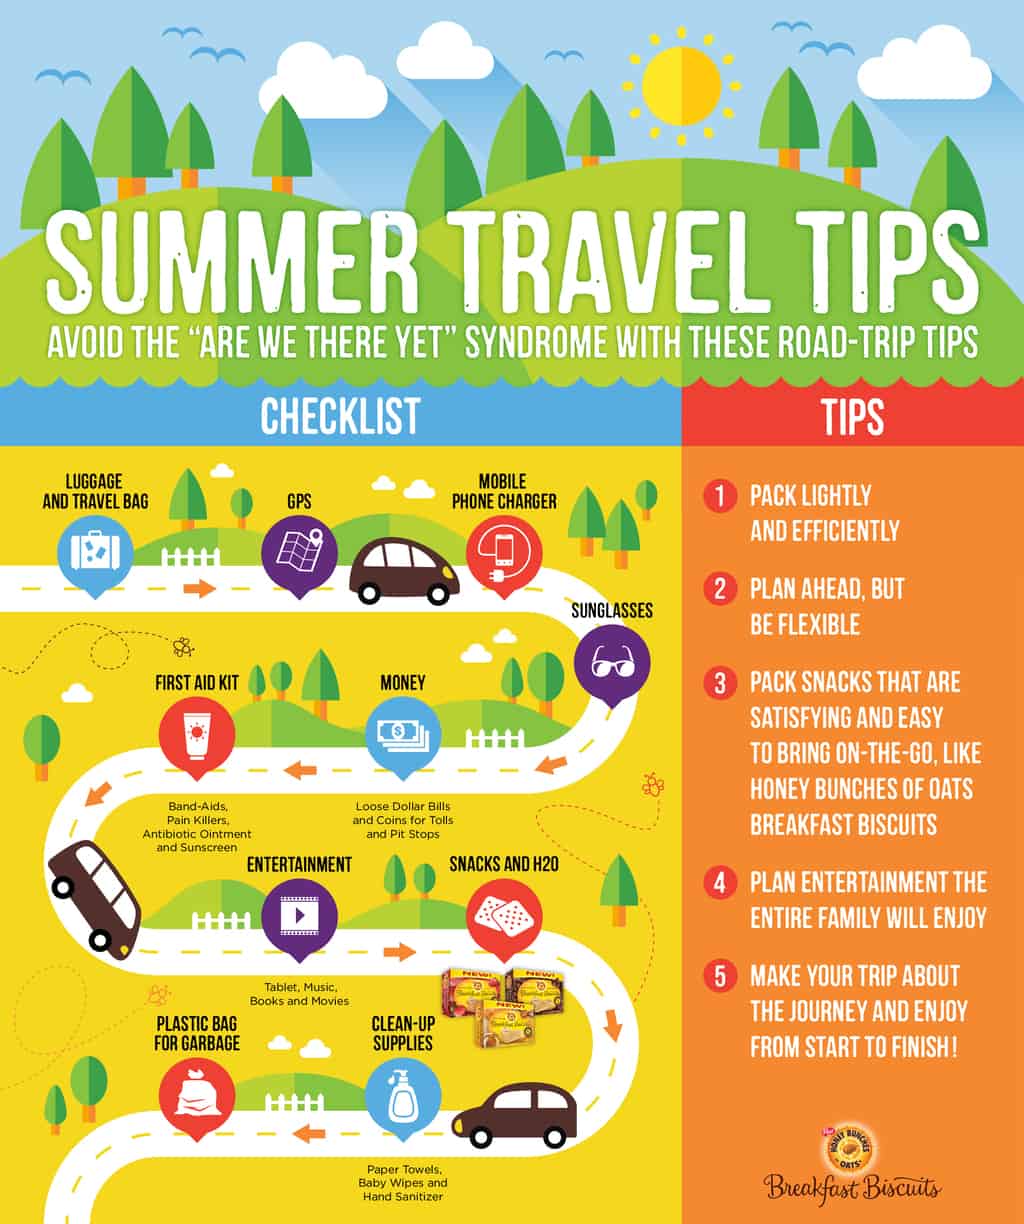 Summer Travel Tips Avoid the Are we There Yet Syndrome with these road-trip tips